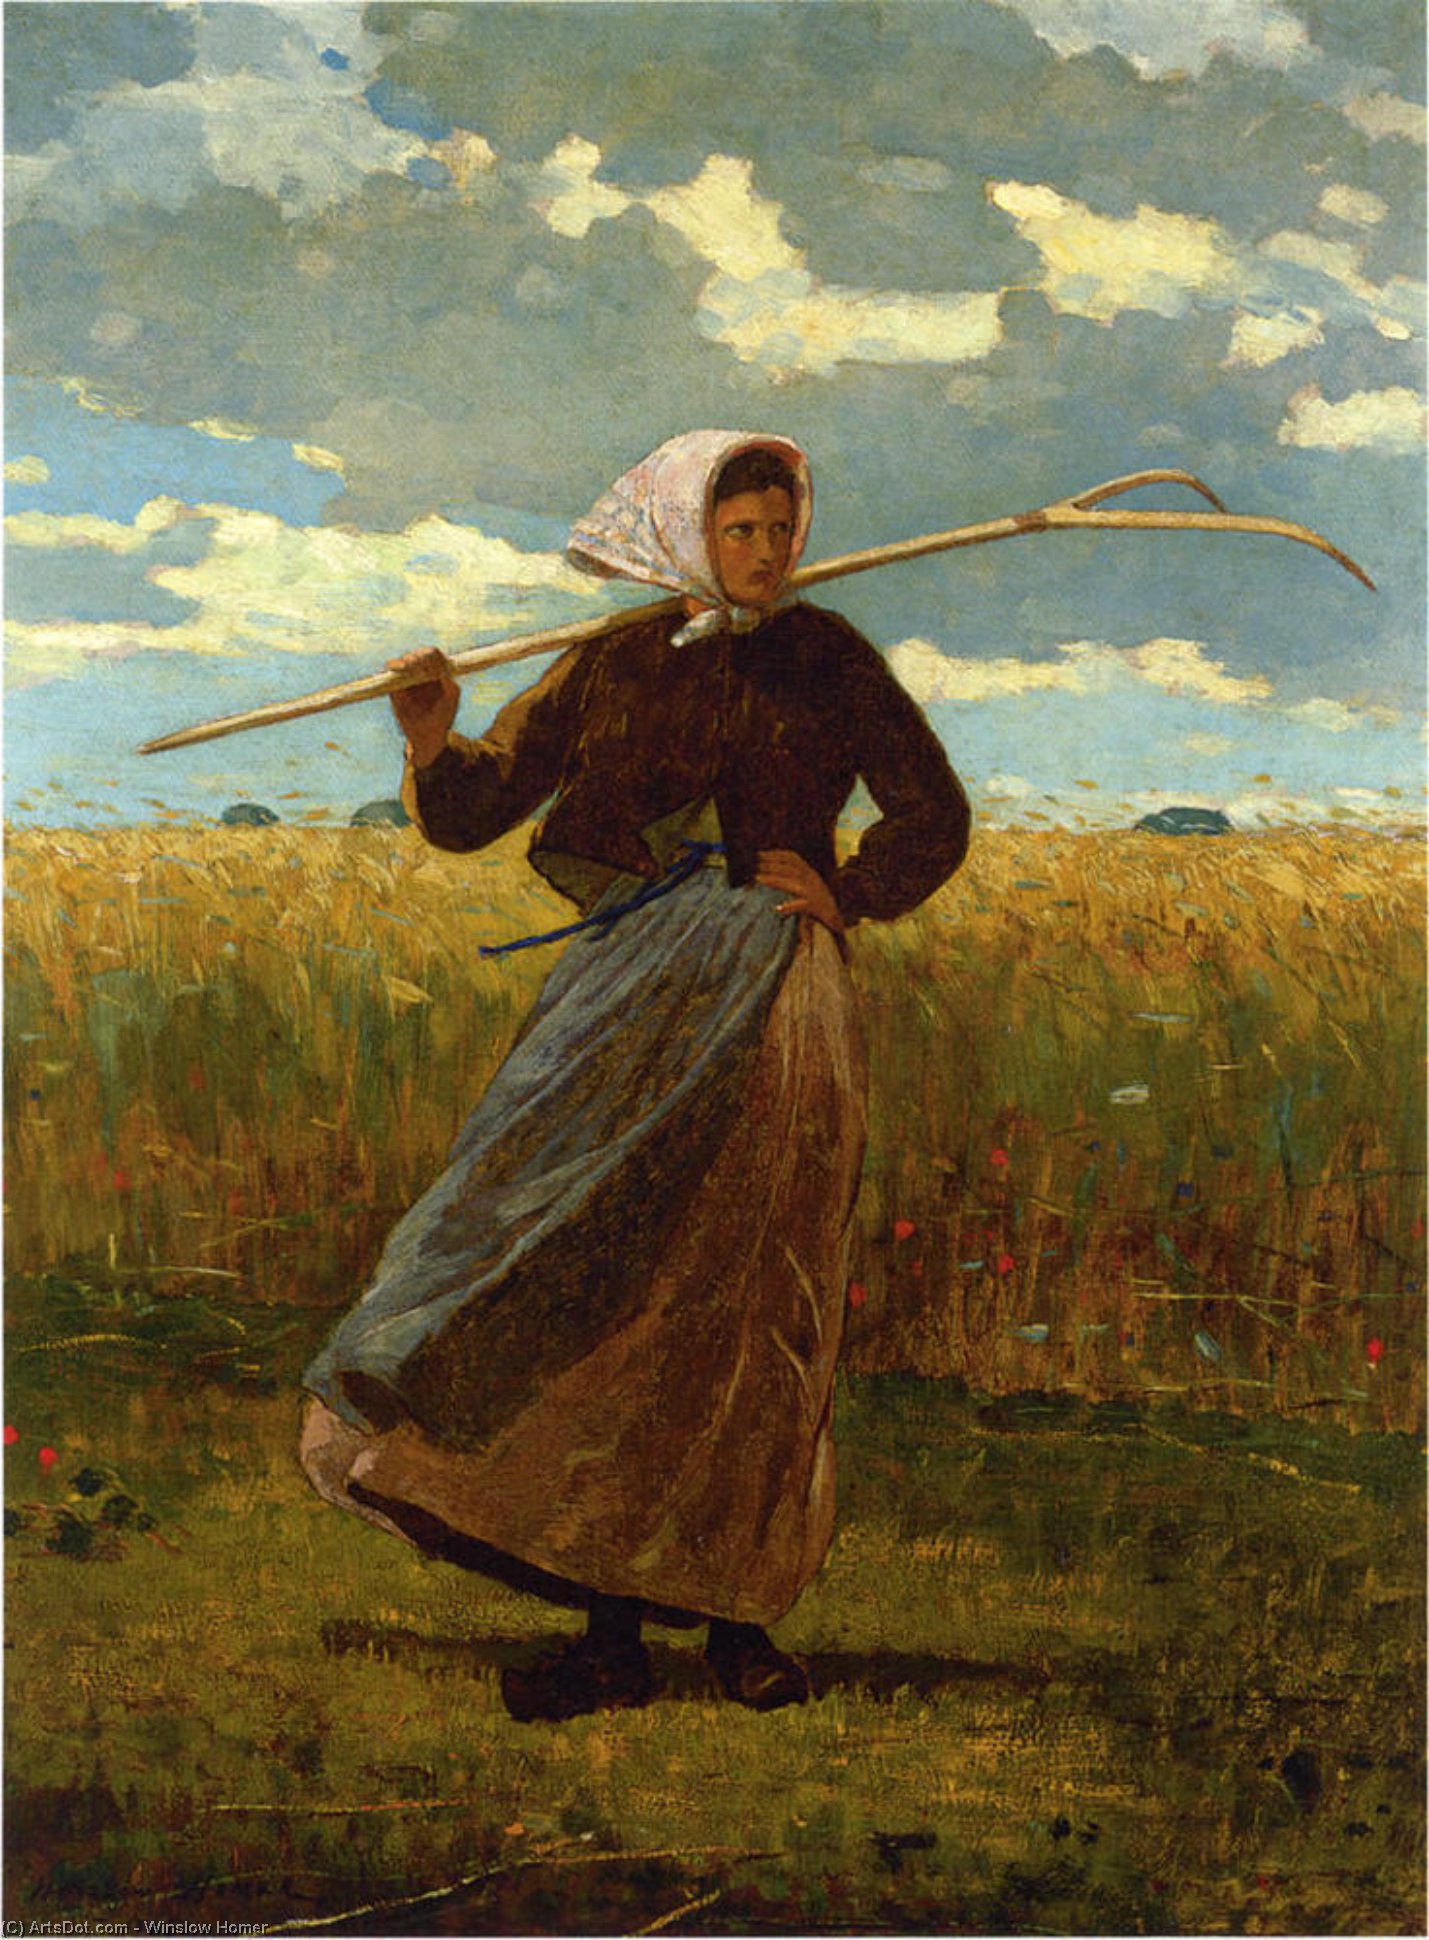 Order Paintings Reproductions The Return of the Gleaner, 1867 by Winslow Homer (1836-1910, United States) | ArtsDot.com